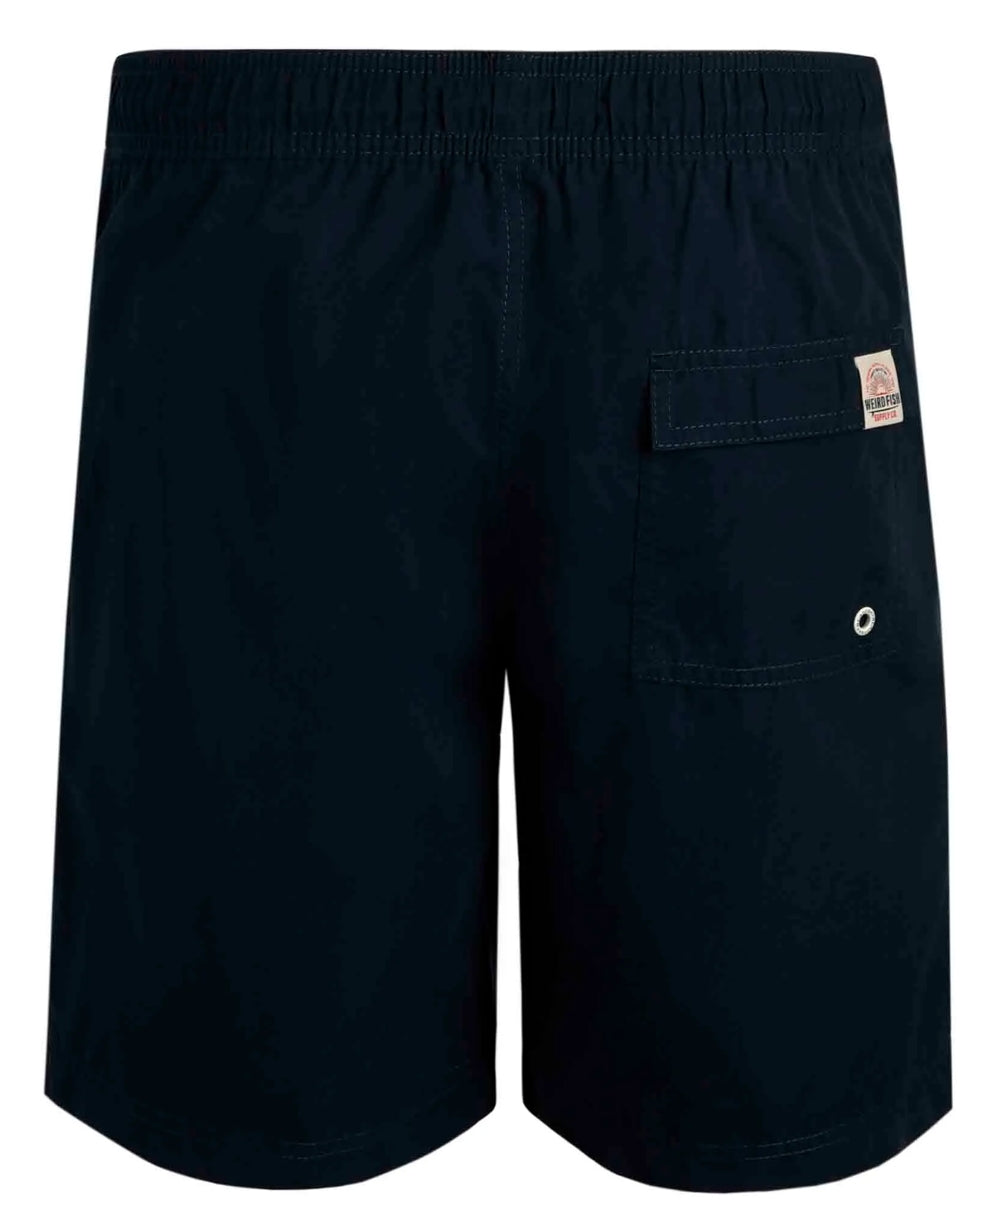 Men's Weird Fish Banning swimshorts from Weird Fish with elasticated waist and back pocket in plain Navy.